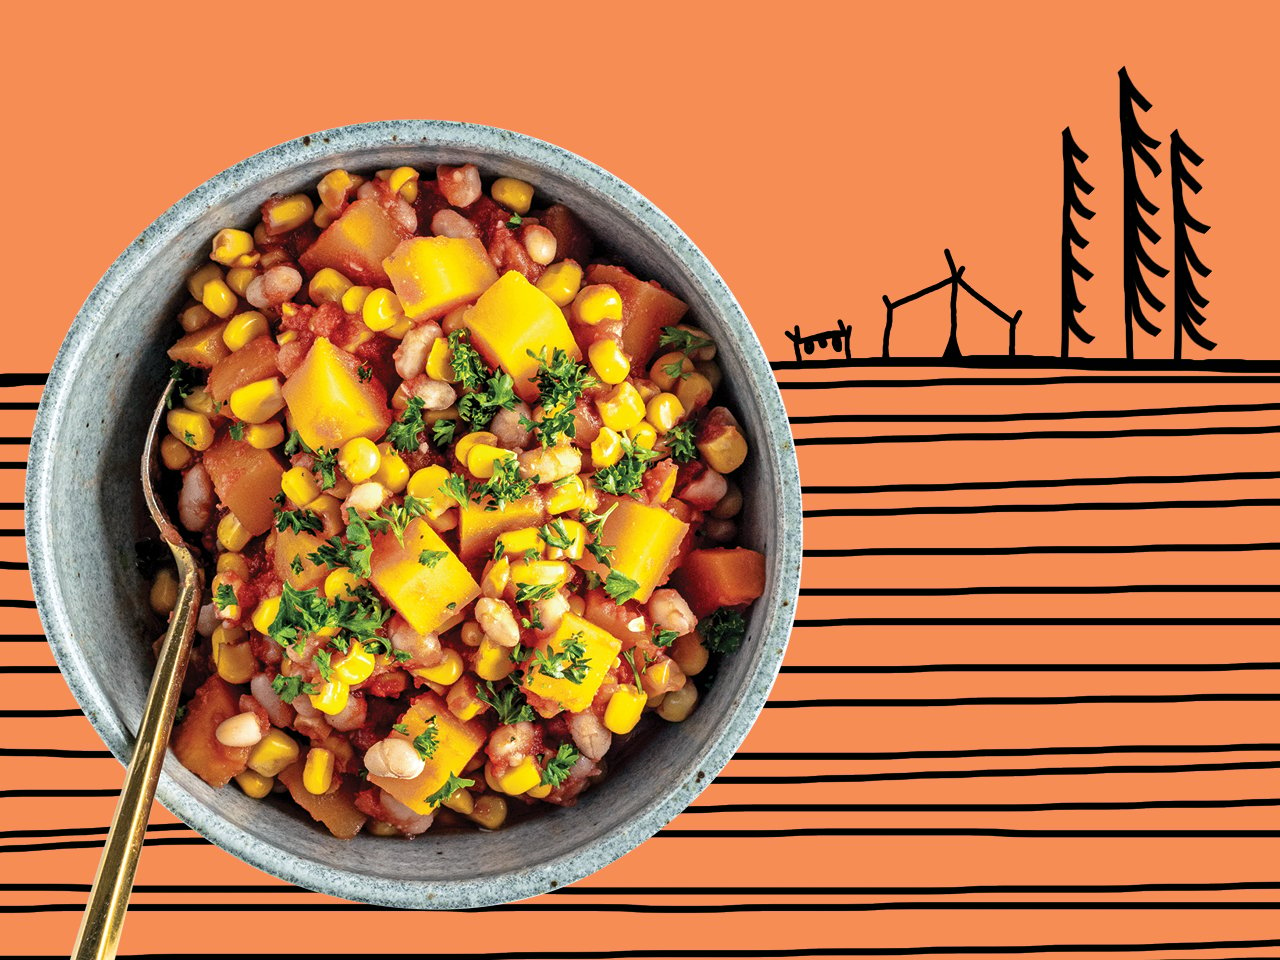 A grey ceramic bowl filled with cubed squash, corn kernels and hominy